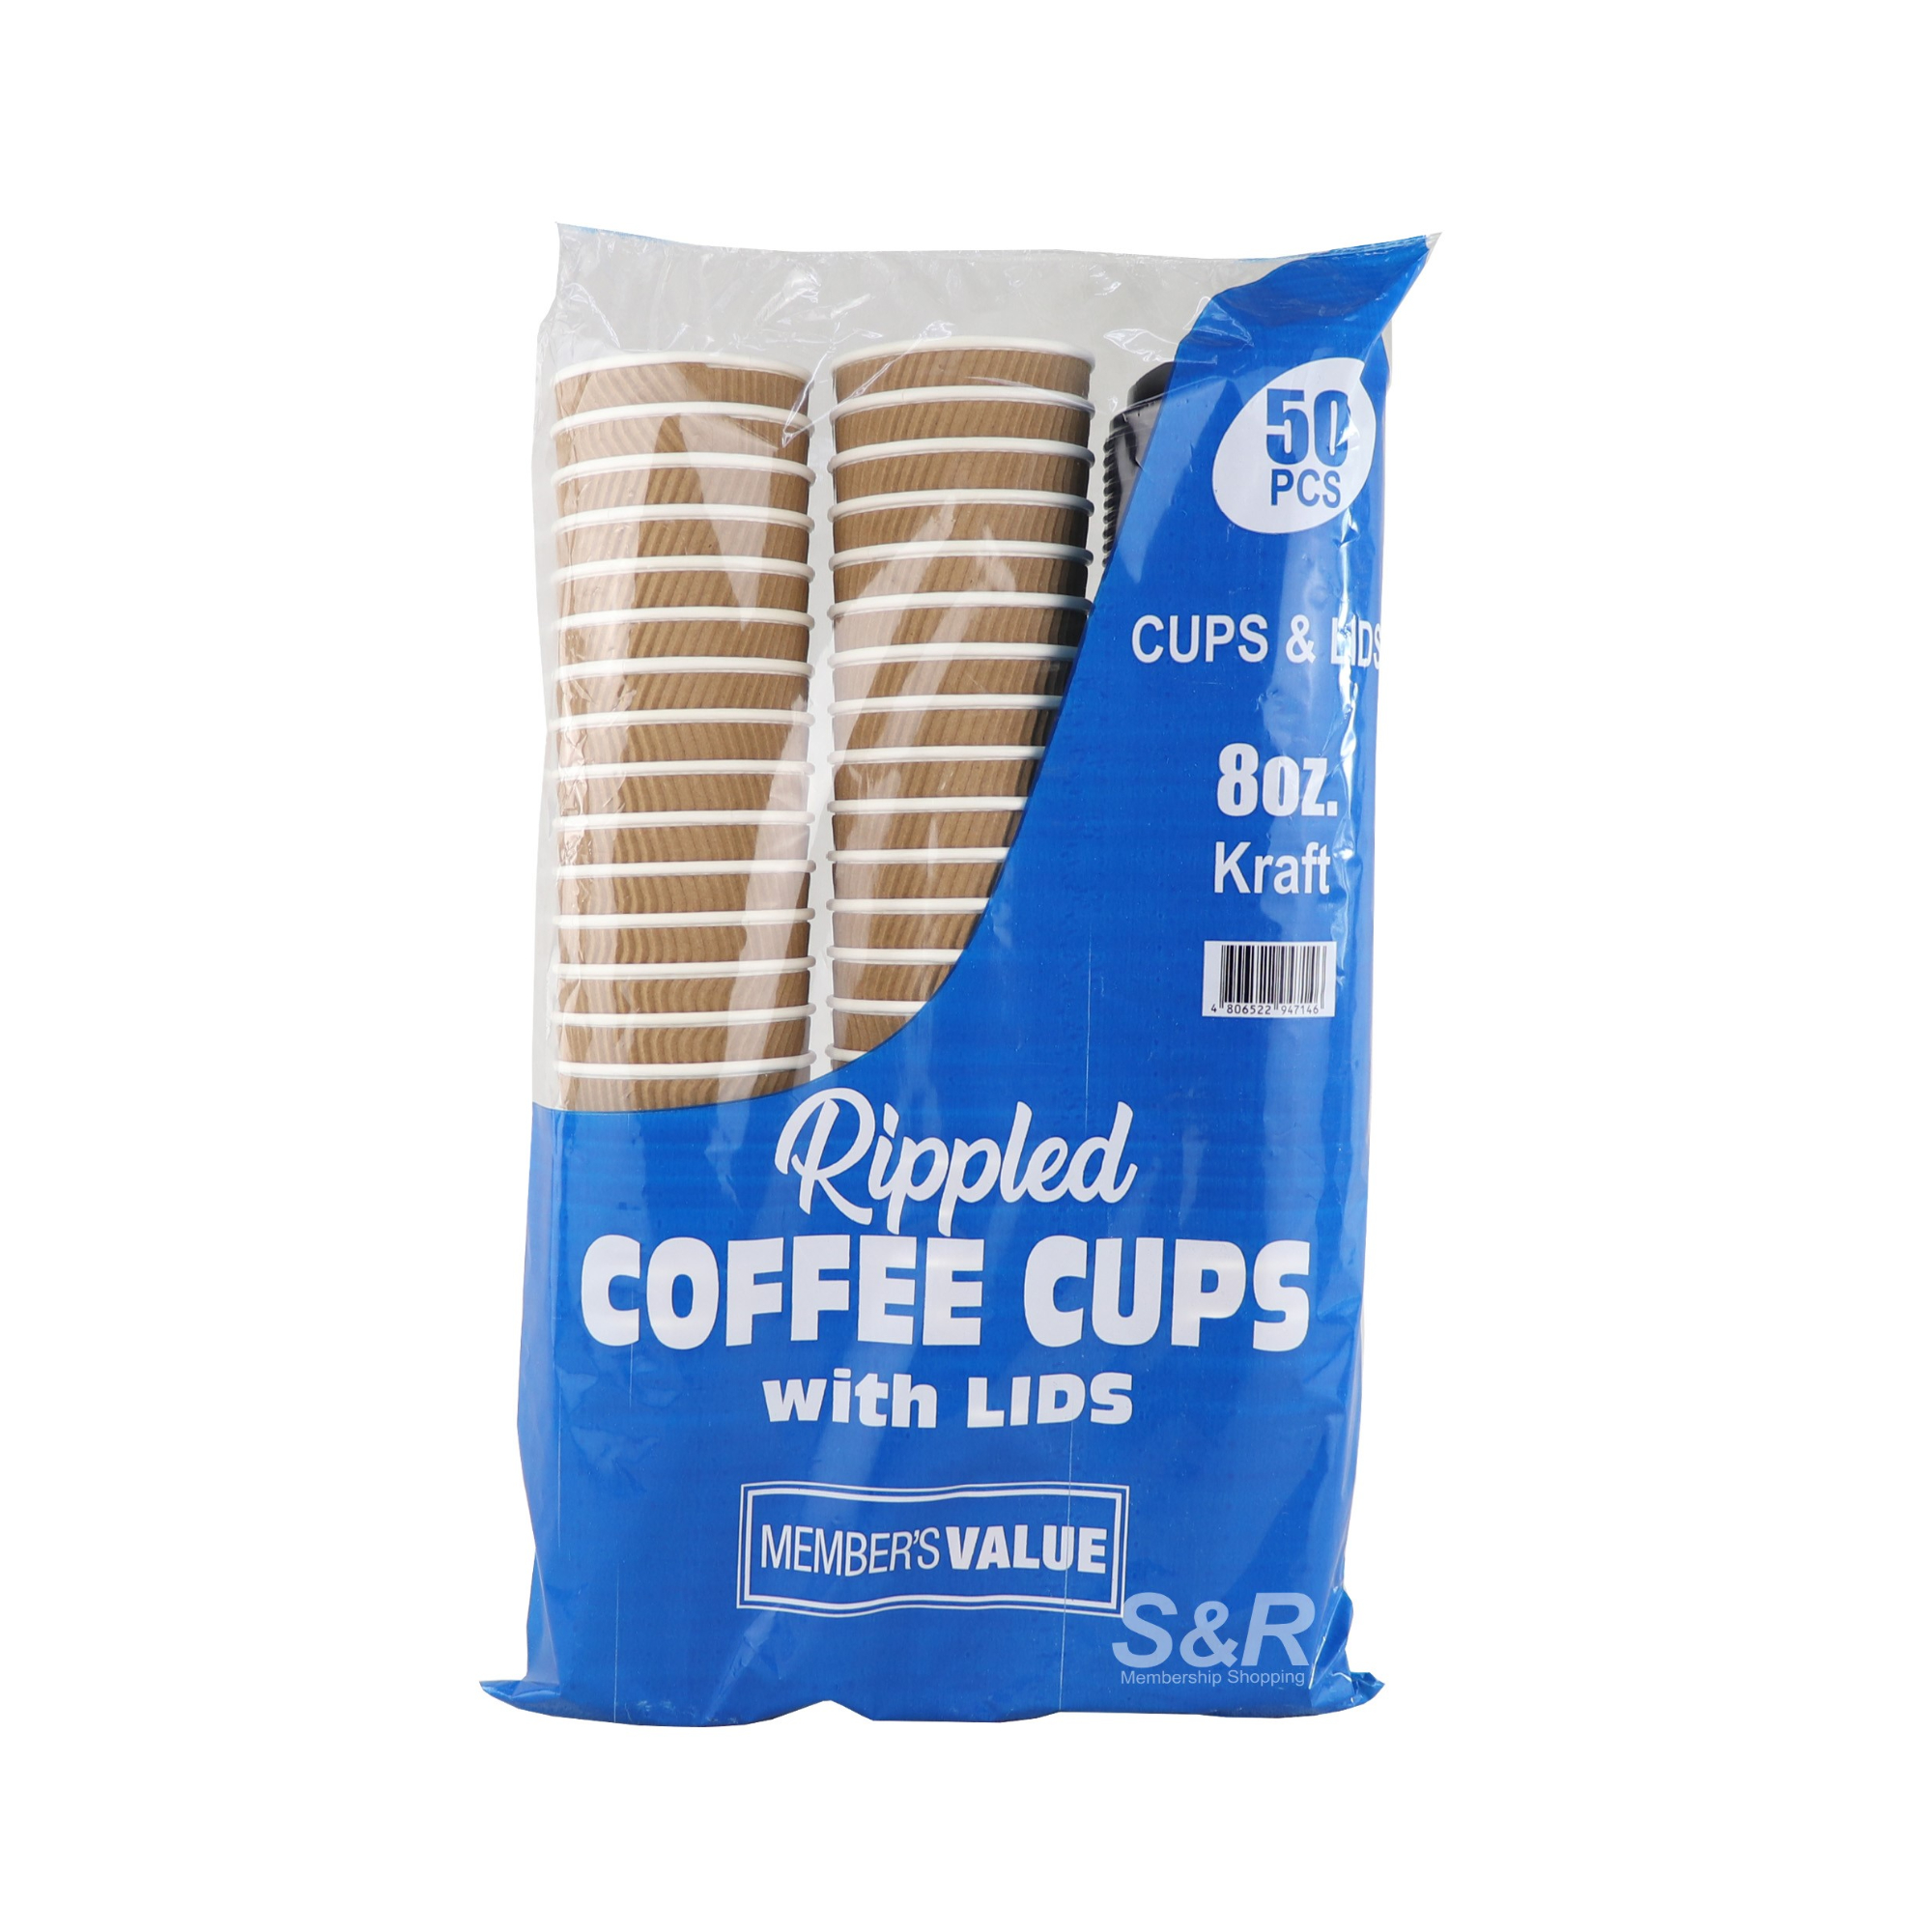 Member's Value 8oz Rippled Coffee Cups 50pcs